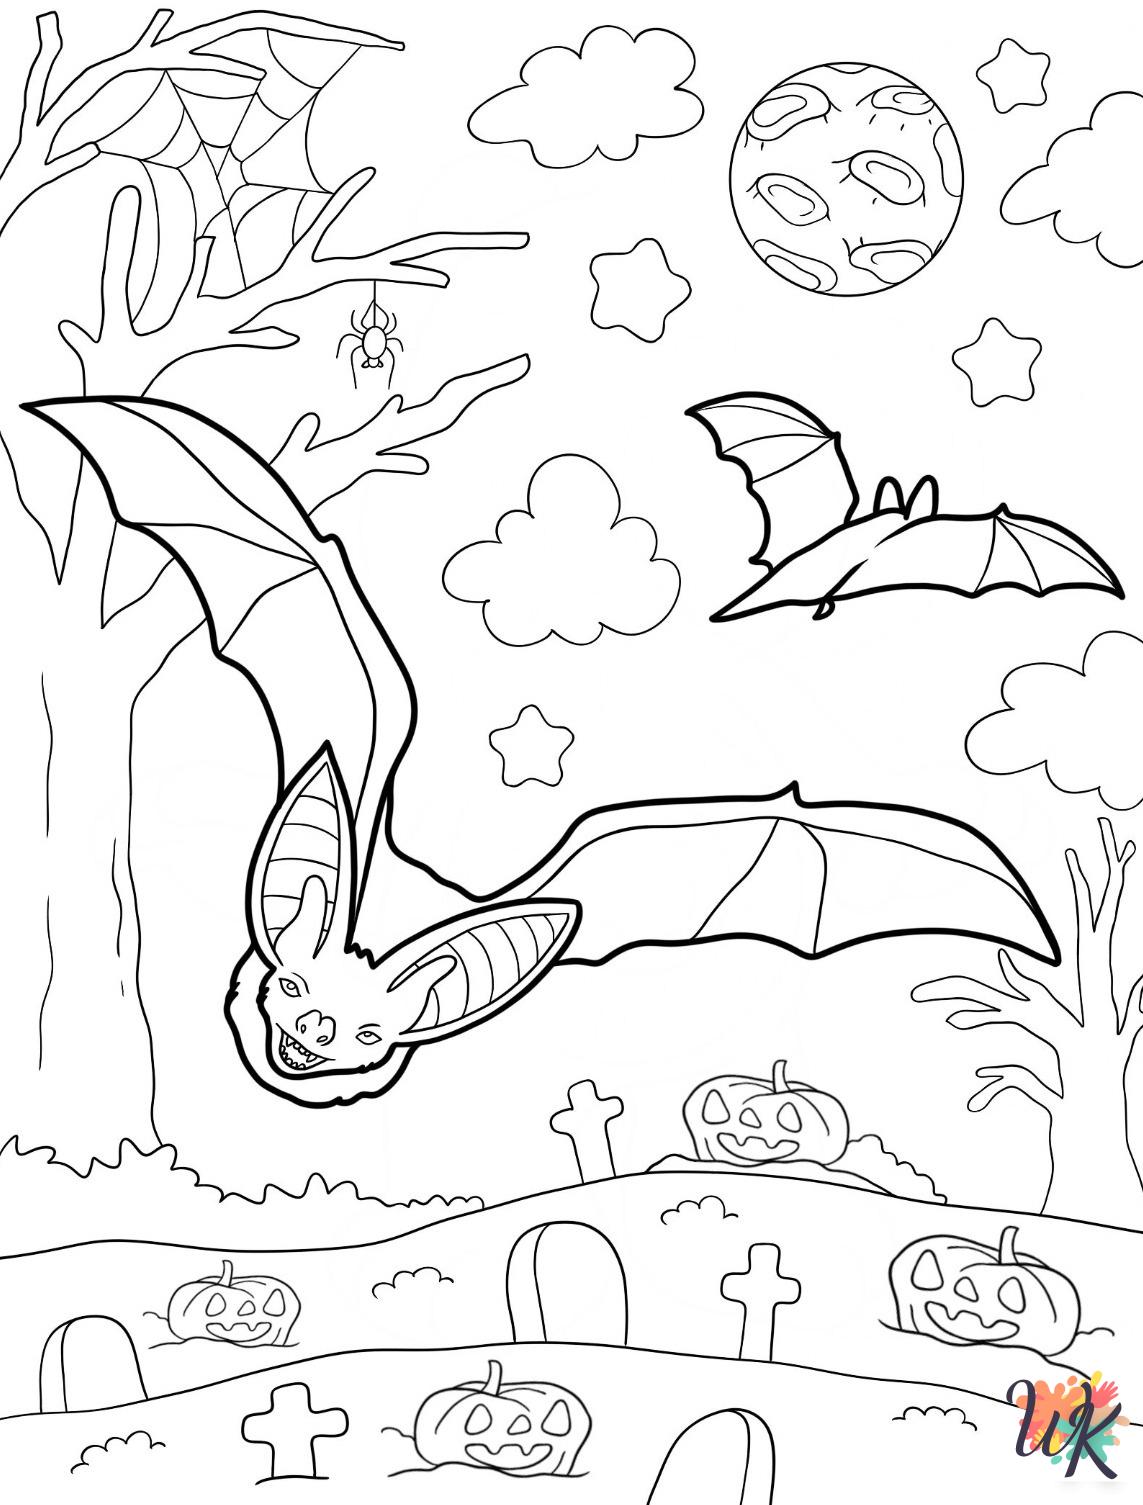 Bat coloring pages for adults pdf